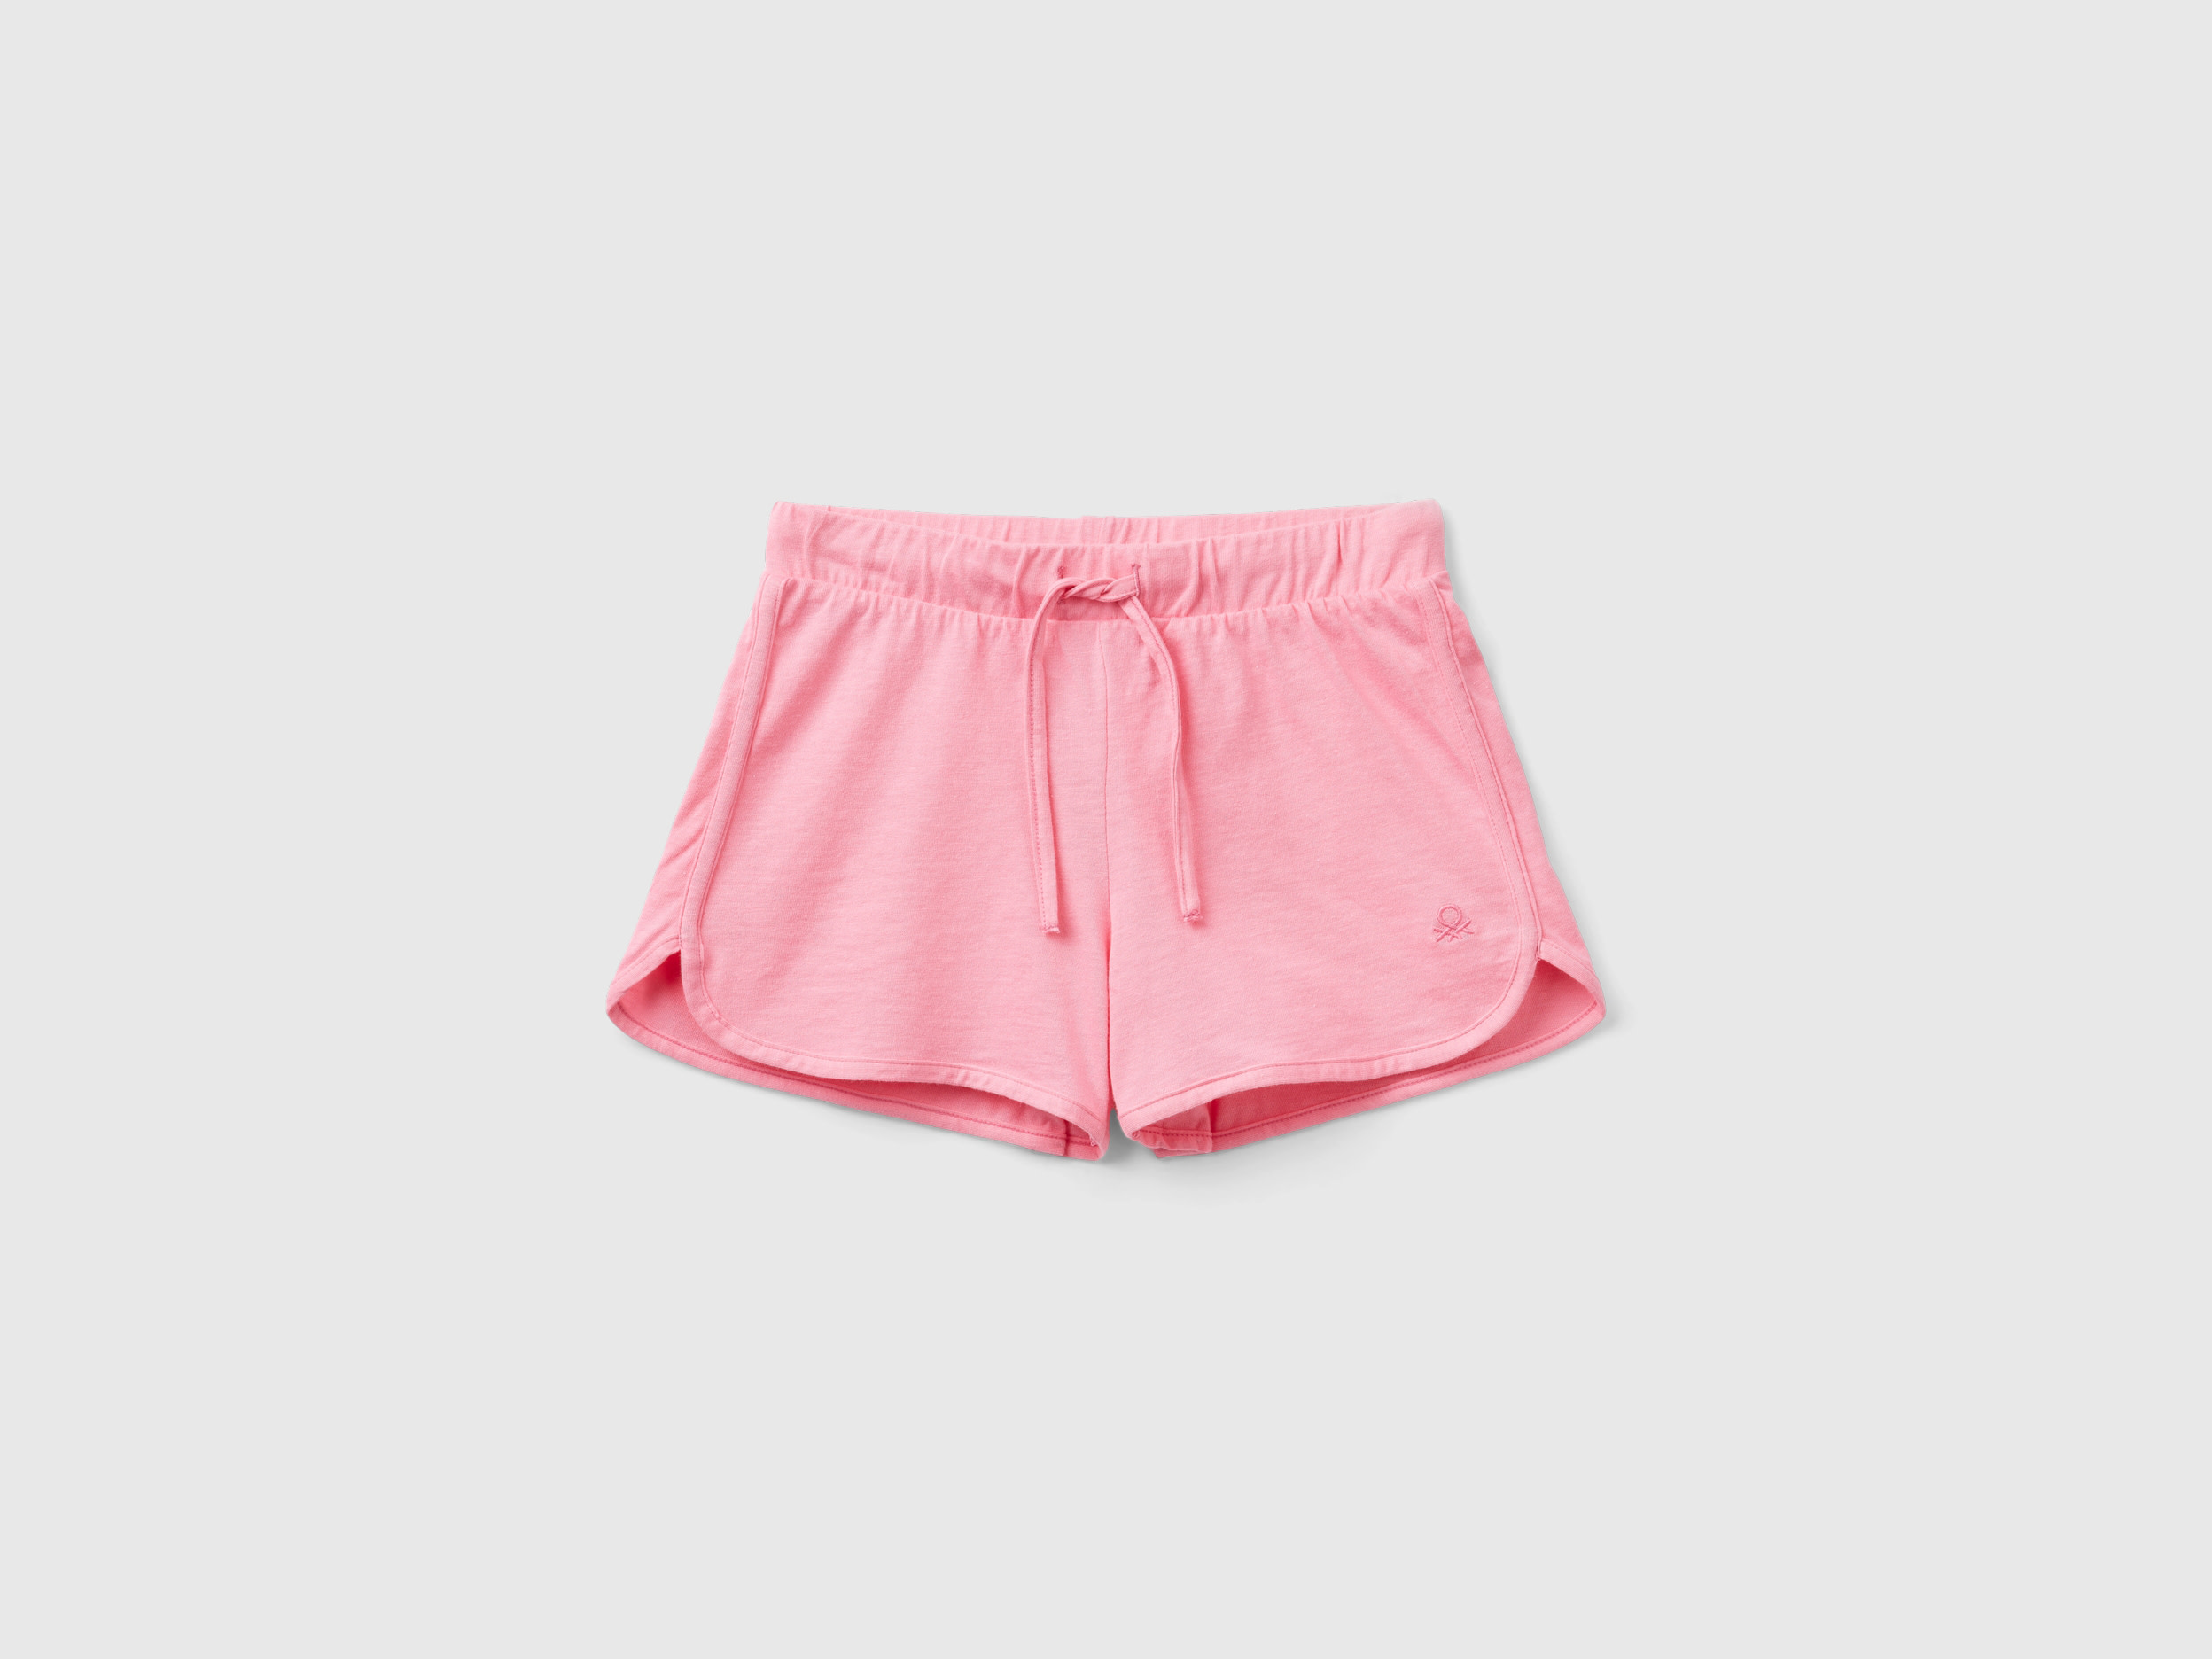 Image of Benetton, Runner Style Shorts In Organic Cotton, size 2XL, Pink, Kids